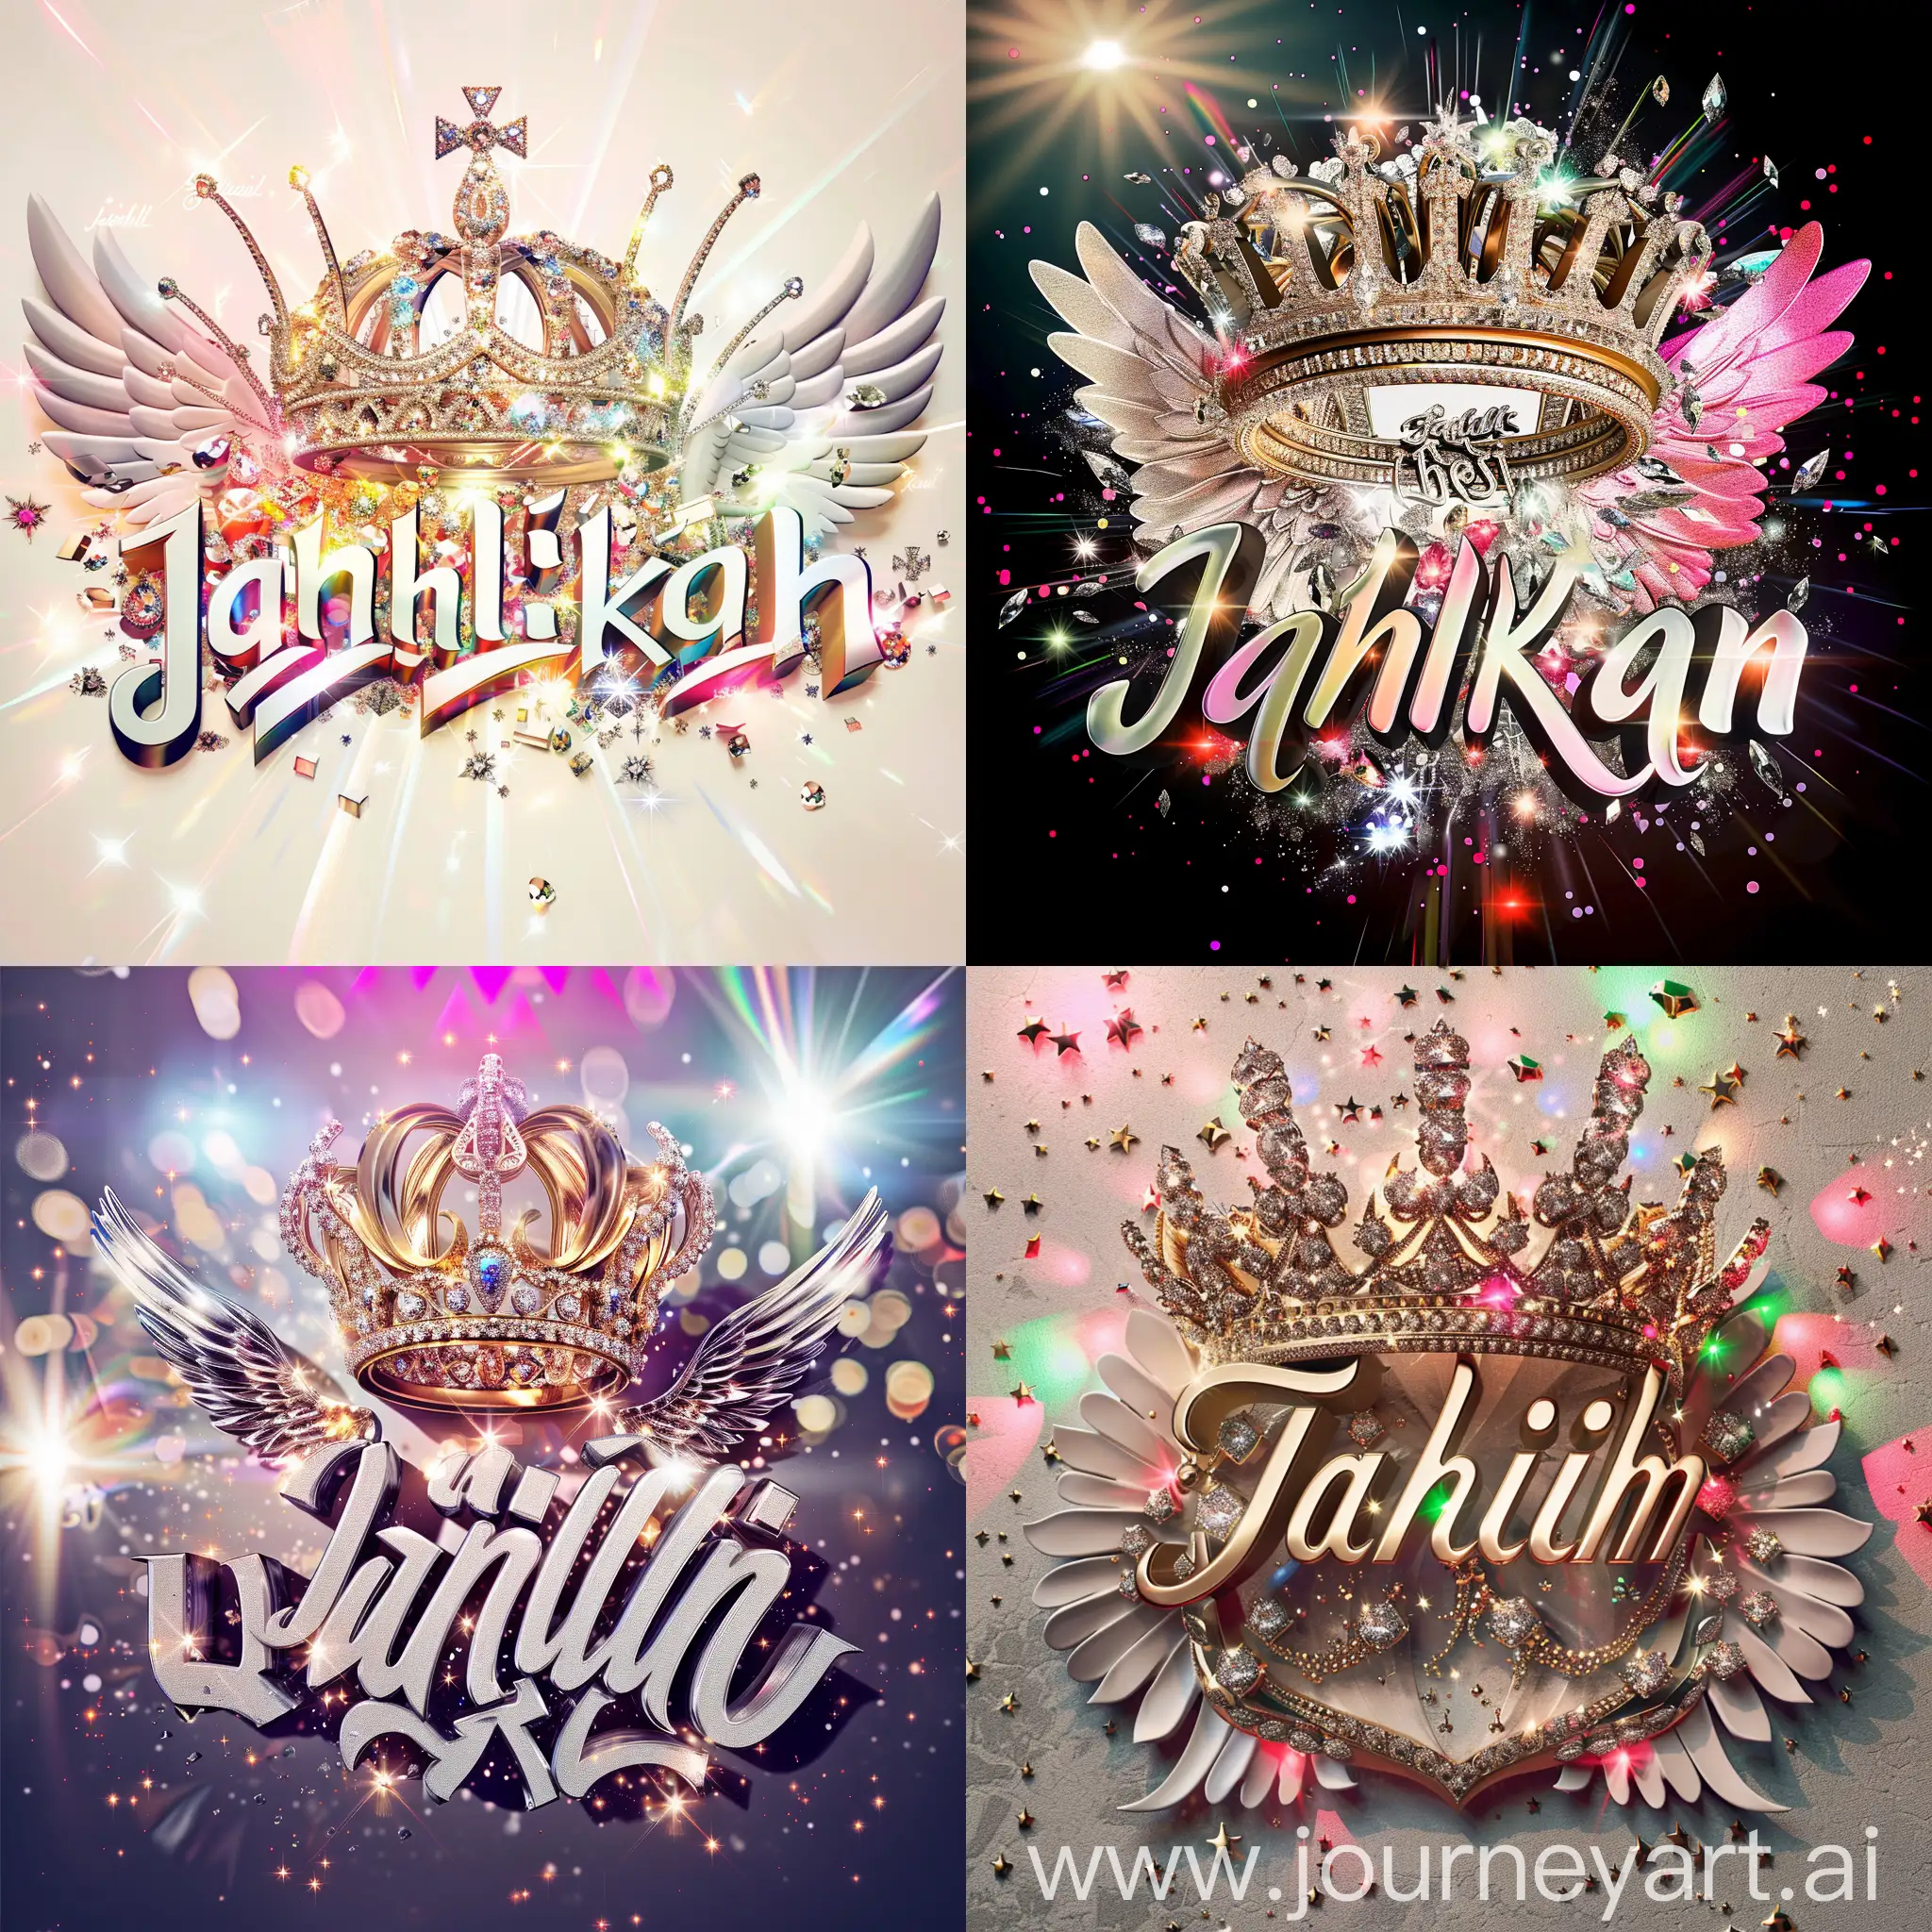 Elegant 3D typography with the name. " Jahil khan" with an elegant crown and fine diamonds with sparkles of bright colors and angel wings, photo, typography, vibrantv0.1, graffiti, illustration, photo, product, fashion, poster